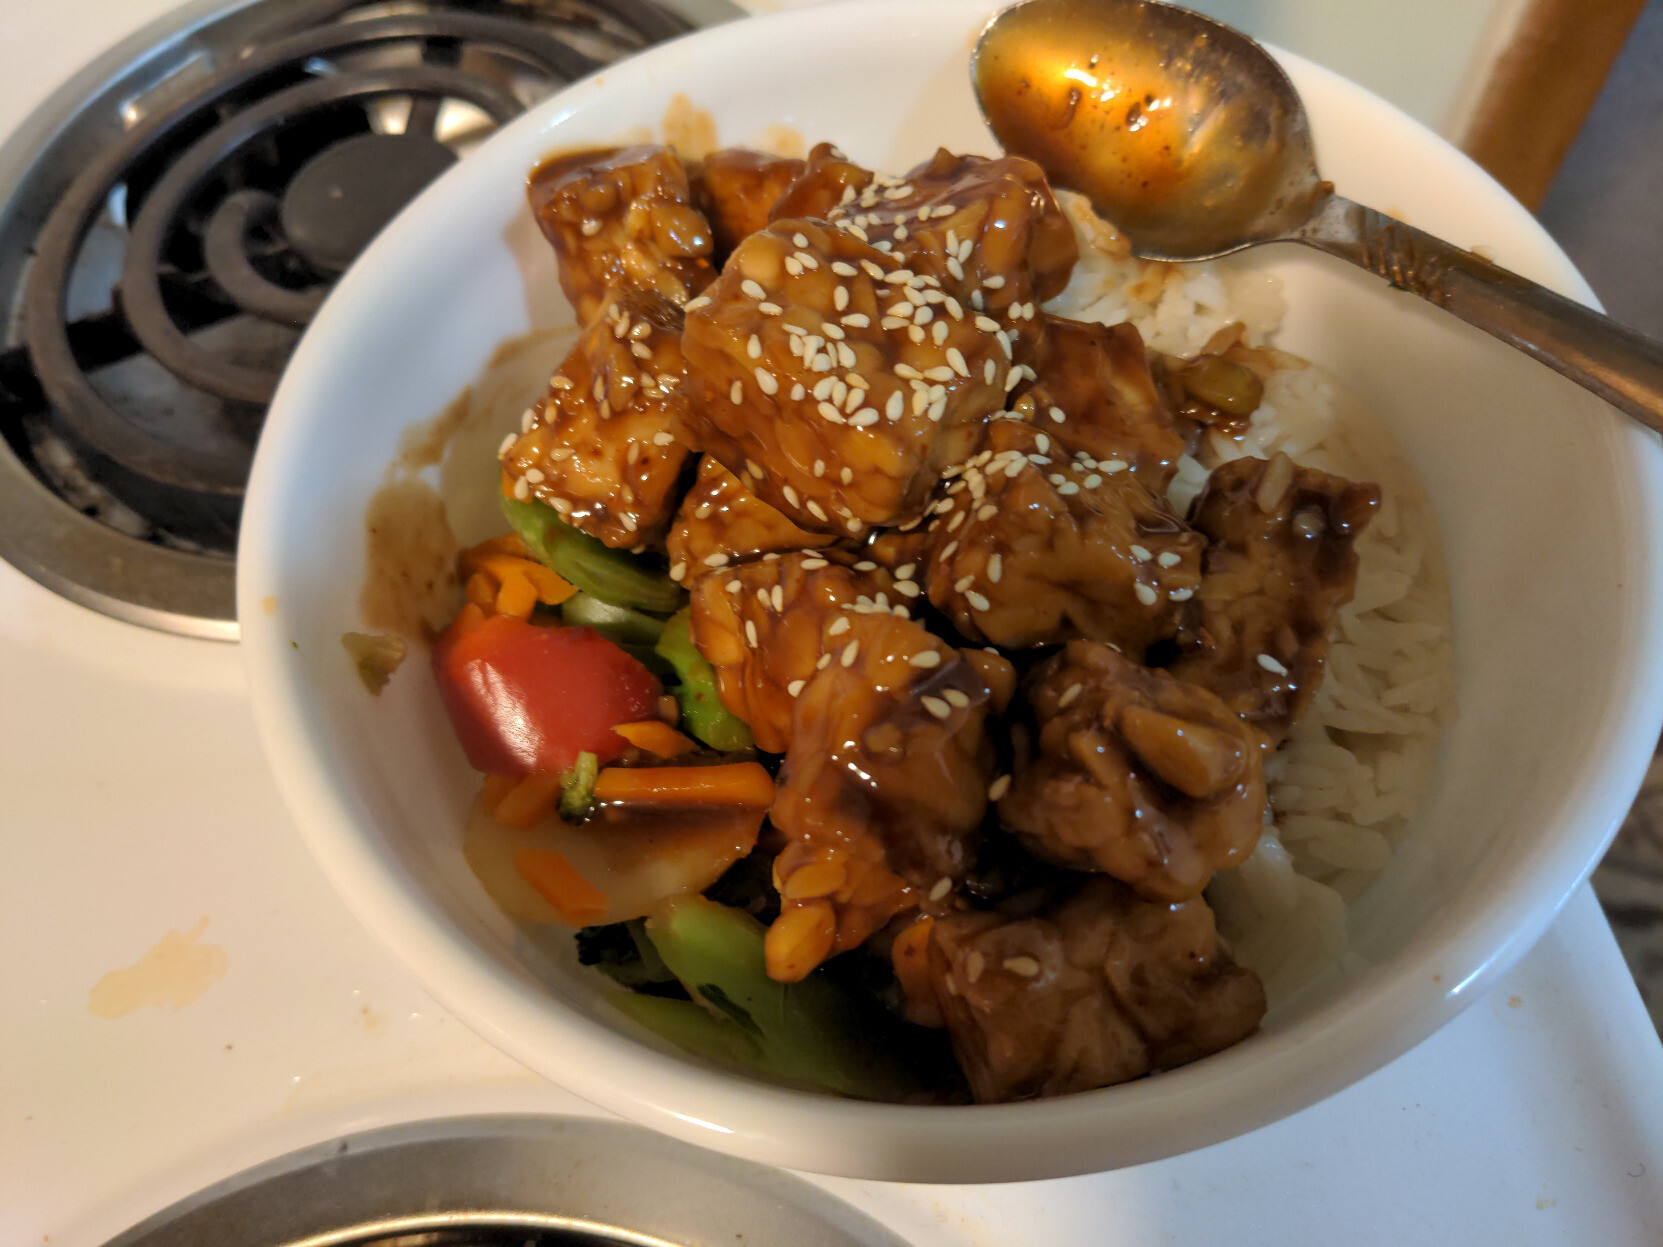 A bowl of stir fry vegetables and jasmine rice, topped with saucy tempeh and garnished with white sesame seeds.